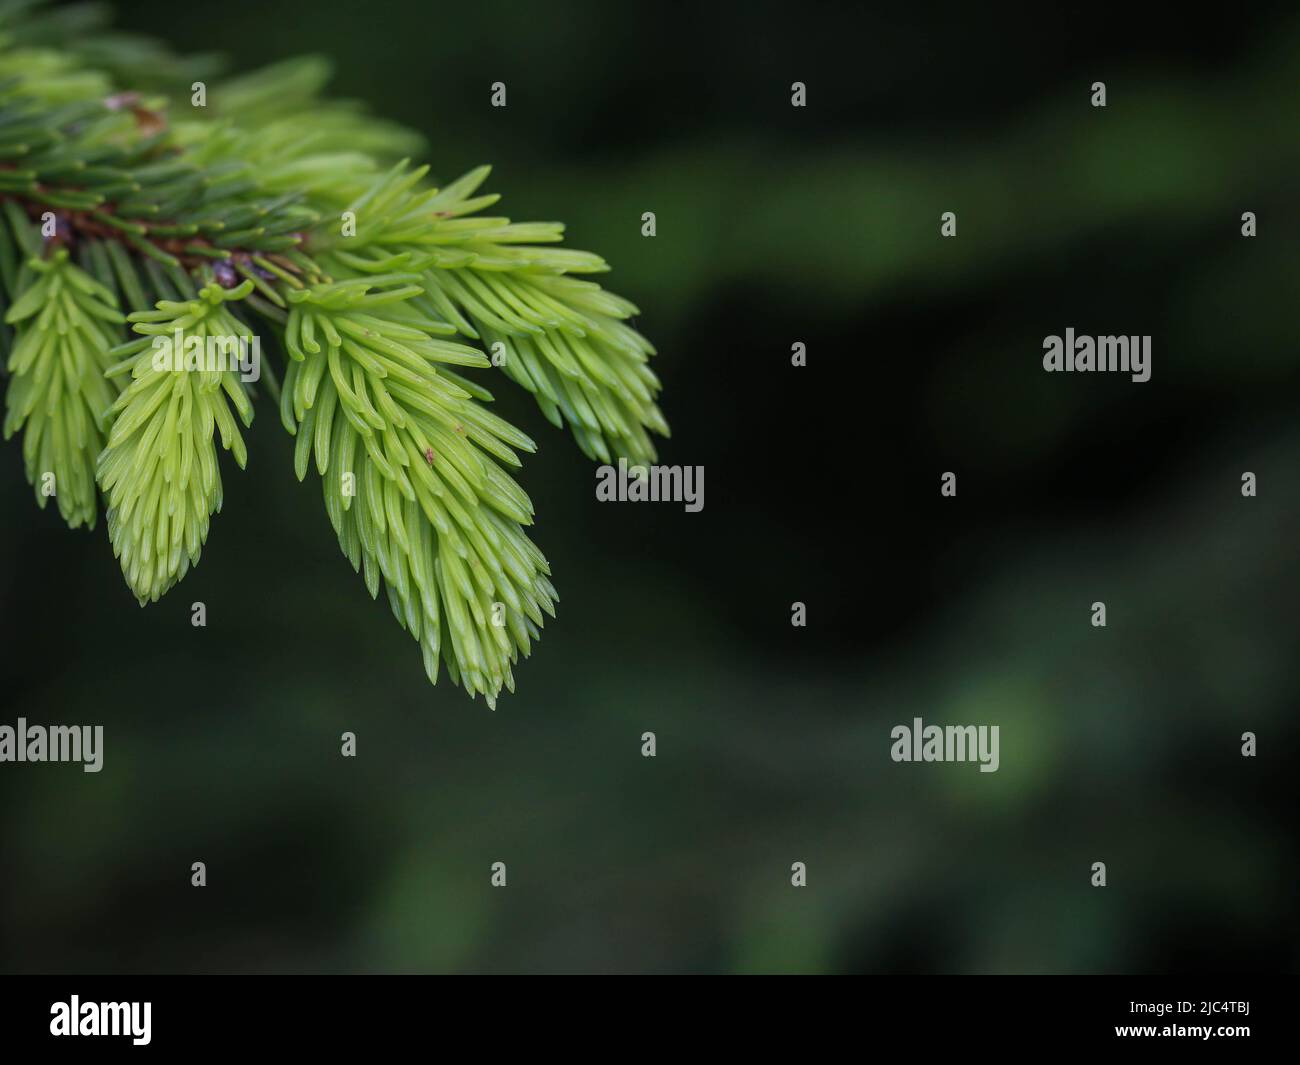 Yound light green shoots of the European spruce (latin name: Picea abies) in Serbia Stock Photo